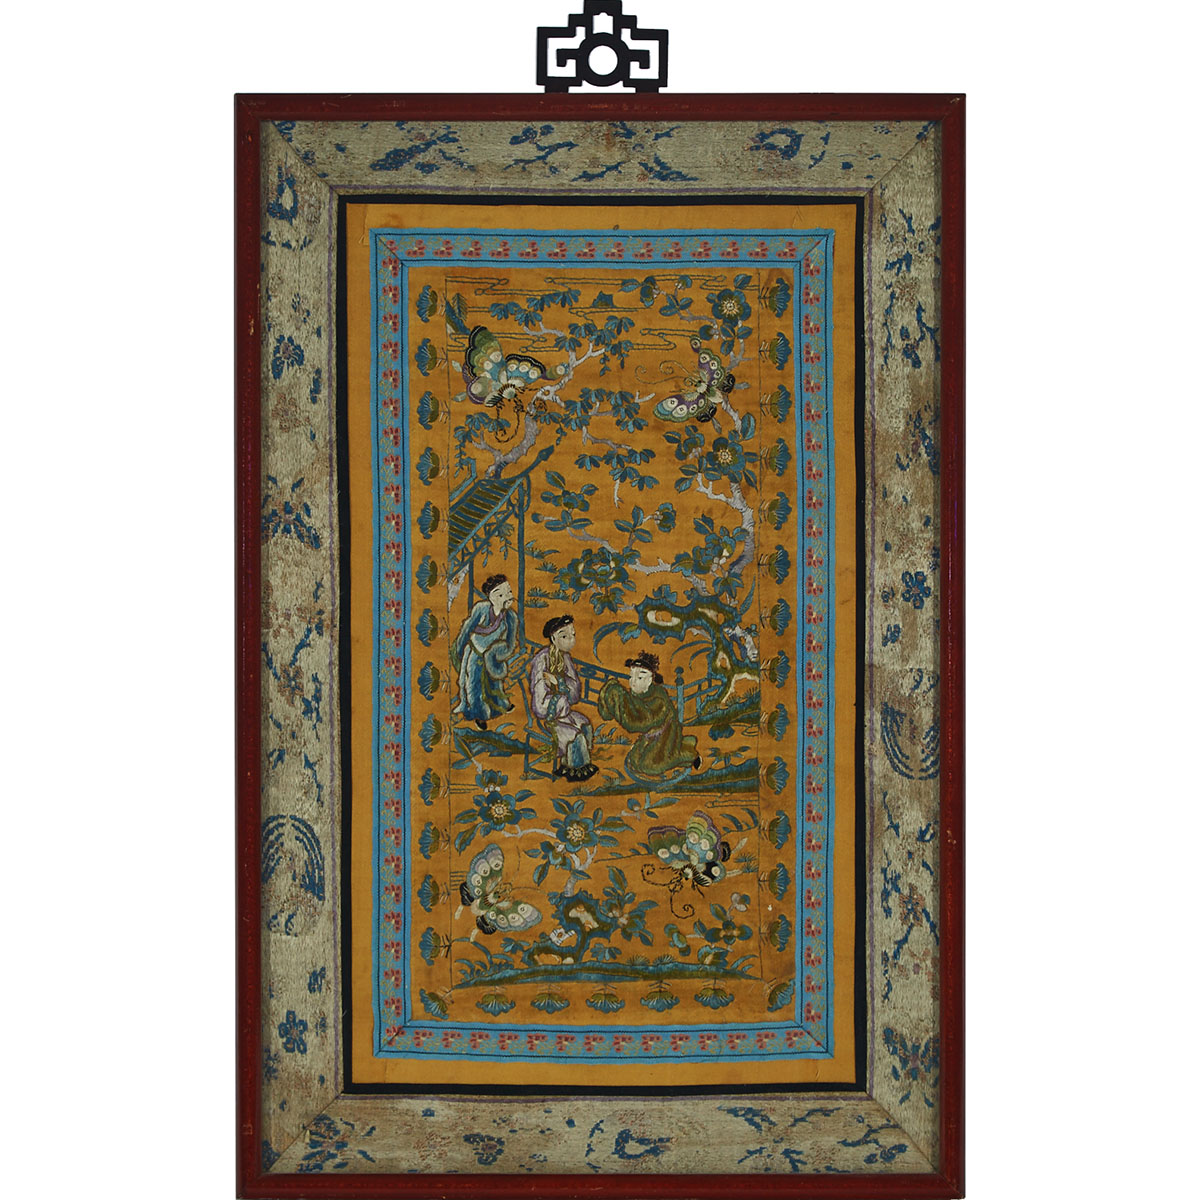 A Chinese Embroidered Garden Panel, 19th Century